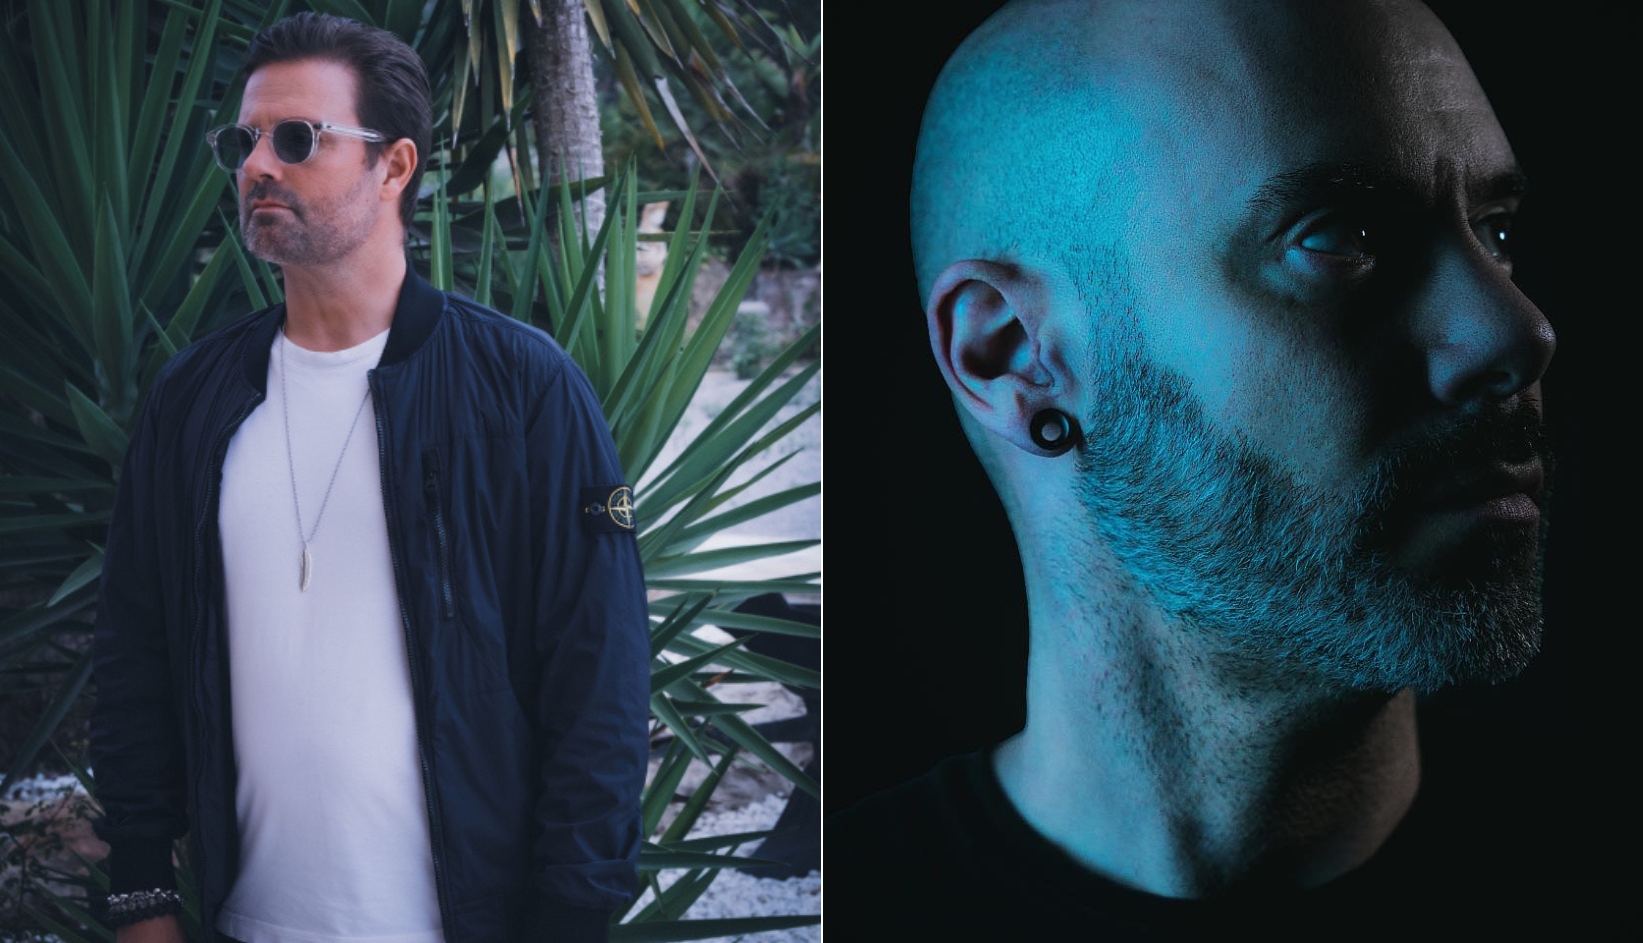 Fordal Drops ‘Alleviate’ EP on Forensic Records With Luis Damora Remix